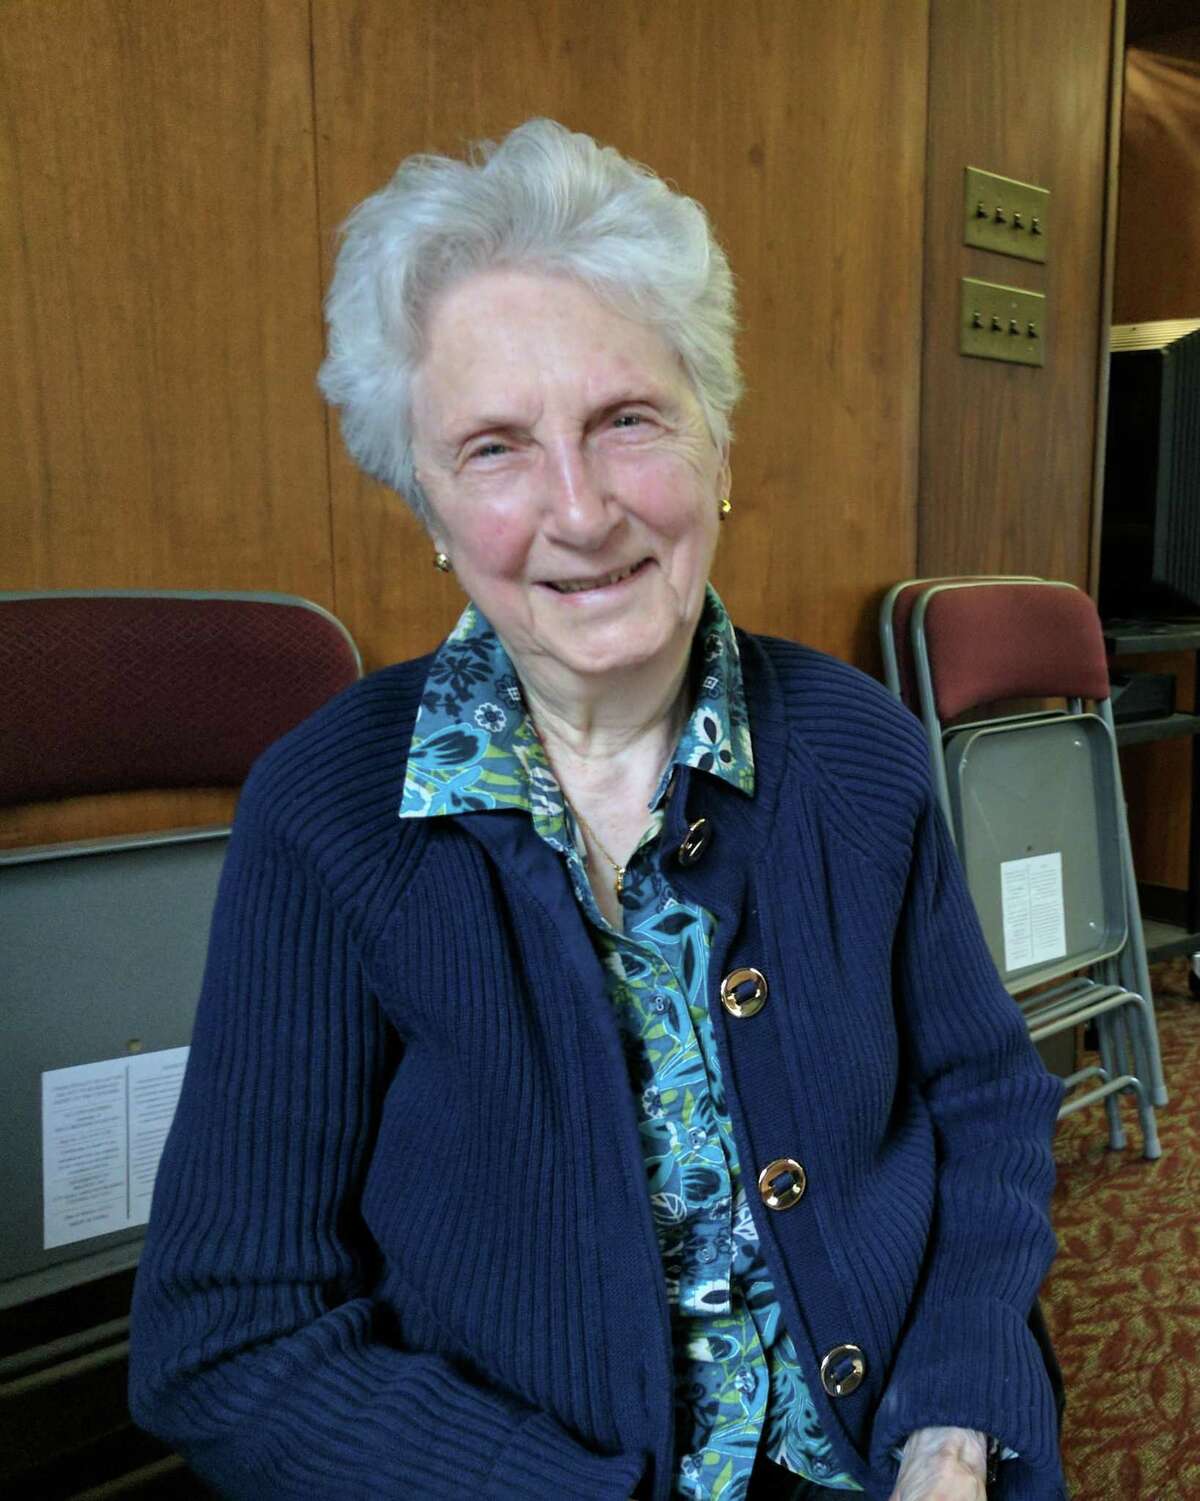 Irene DelBene came to Yonkers at age 14 after fleeing Italy in World War II.